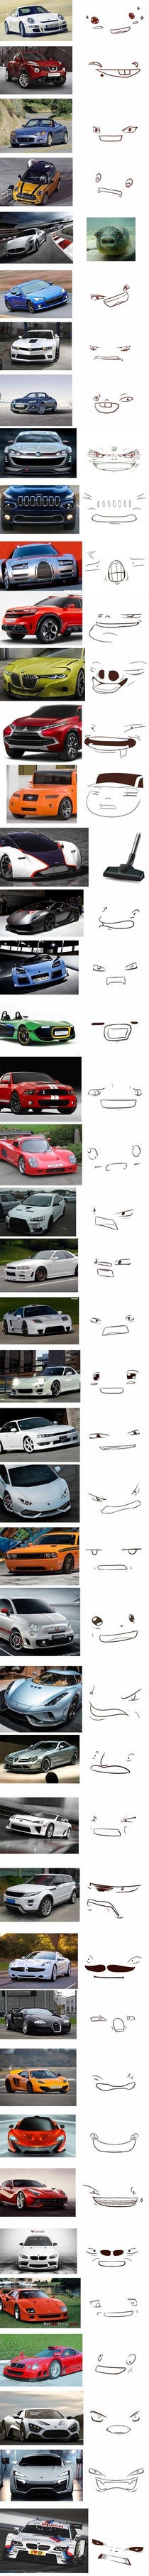 The many faces of cars